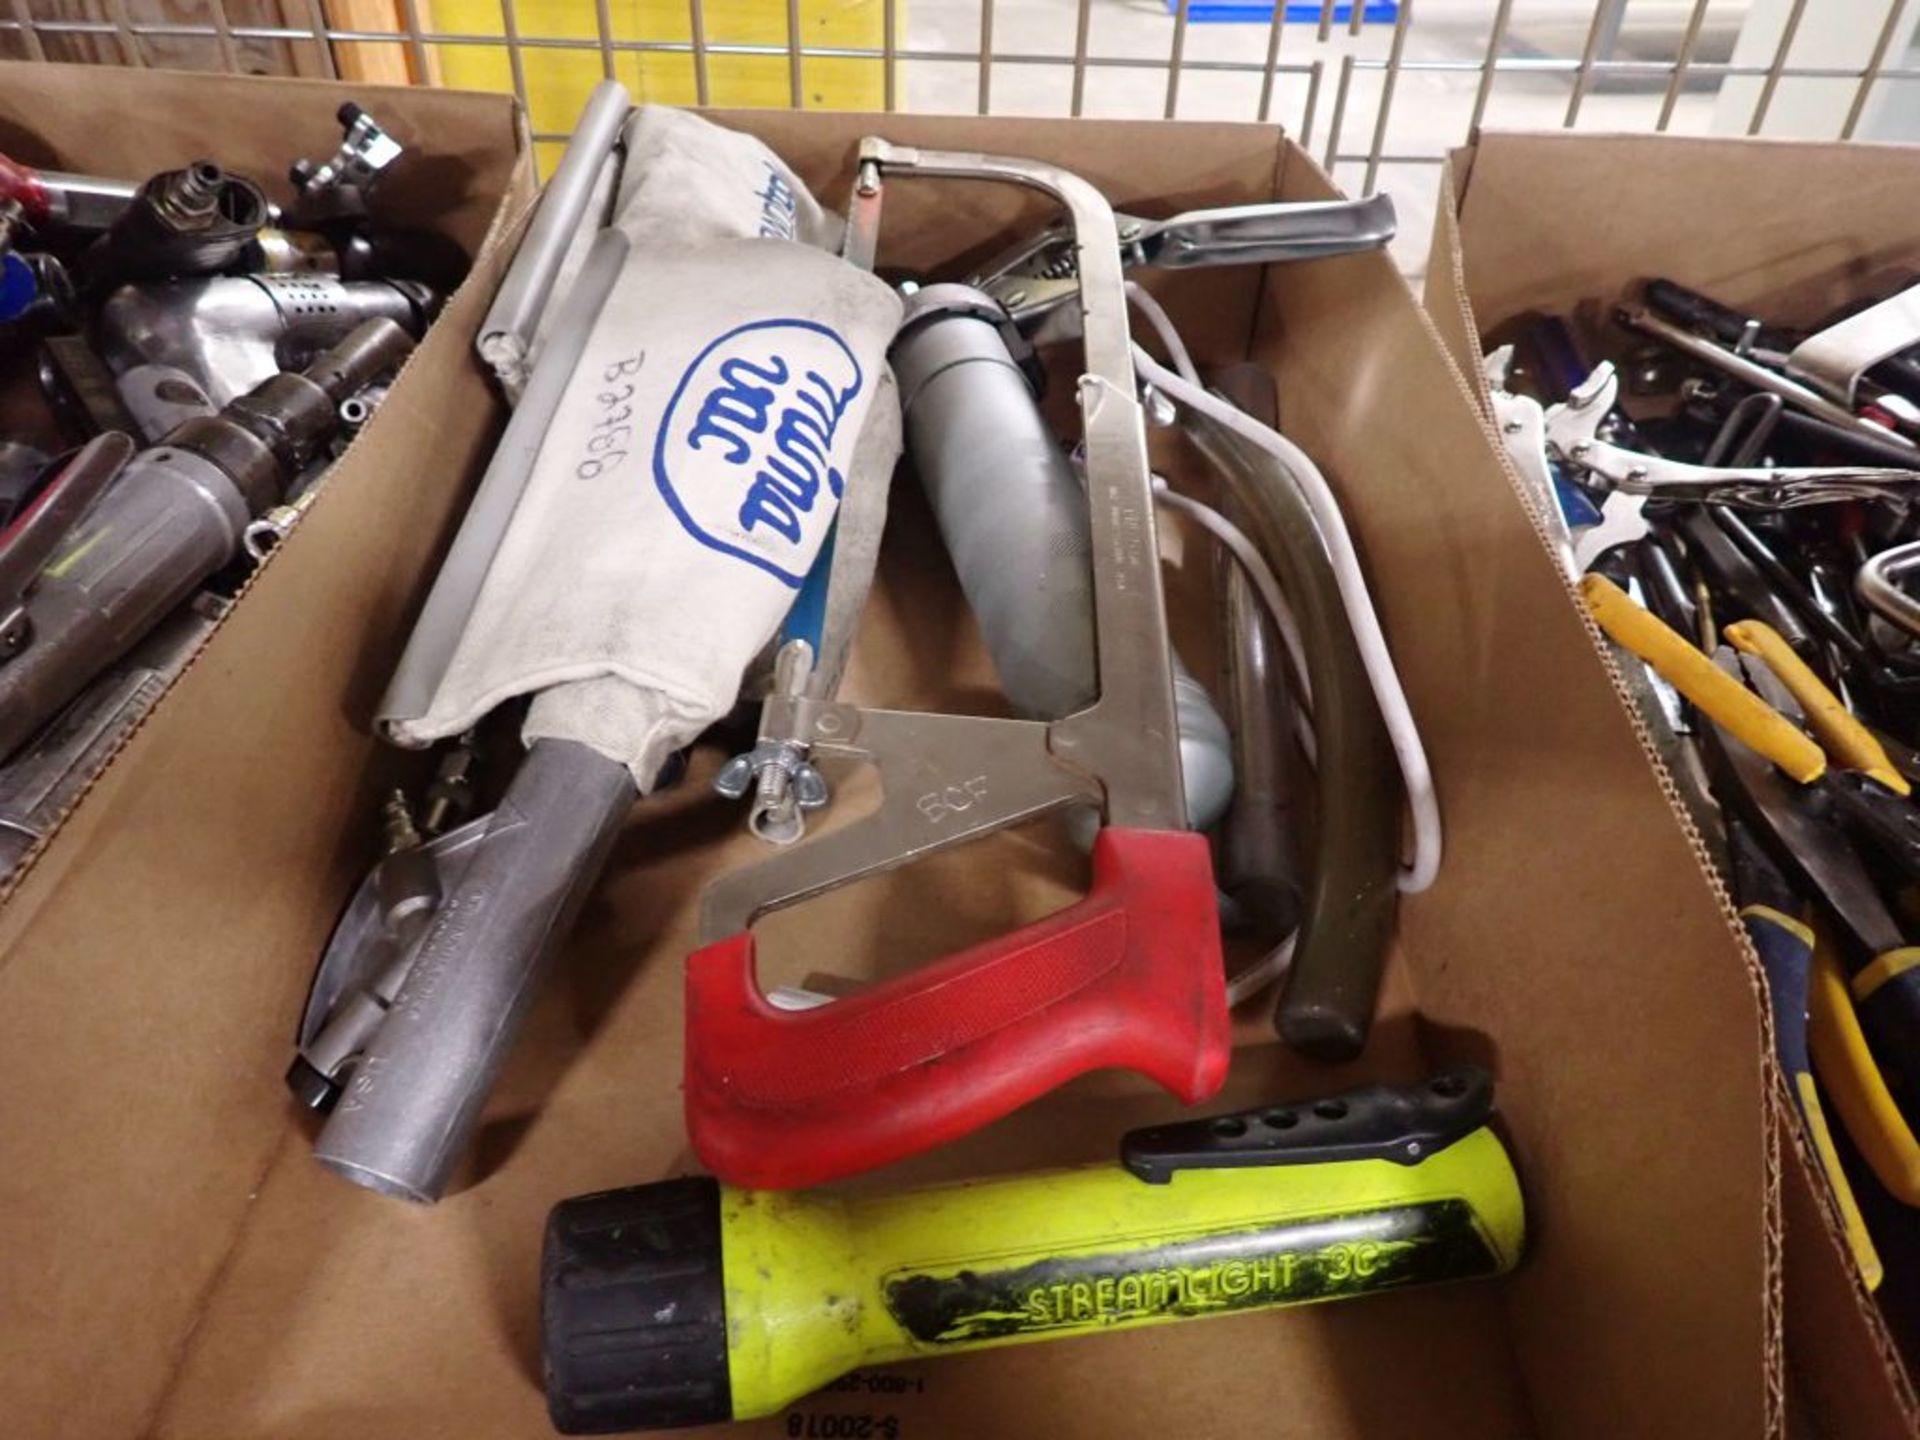 Lot of Assorted Tools | Tag: 241626 | Limited Forklift Assistance Available - $10.00 Lot Loading - Image 4 of 6